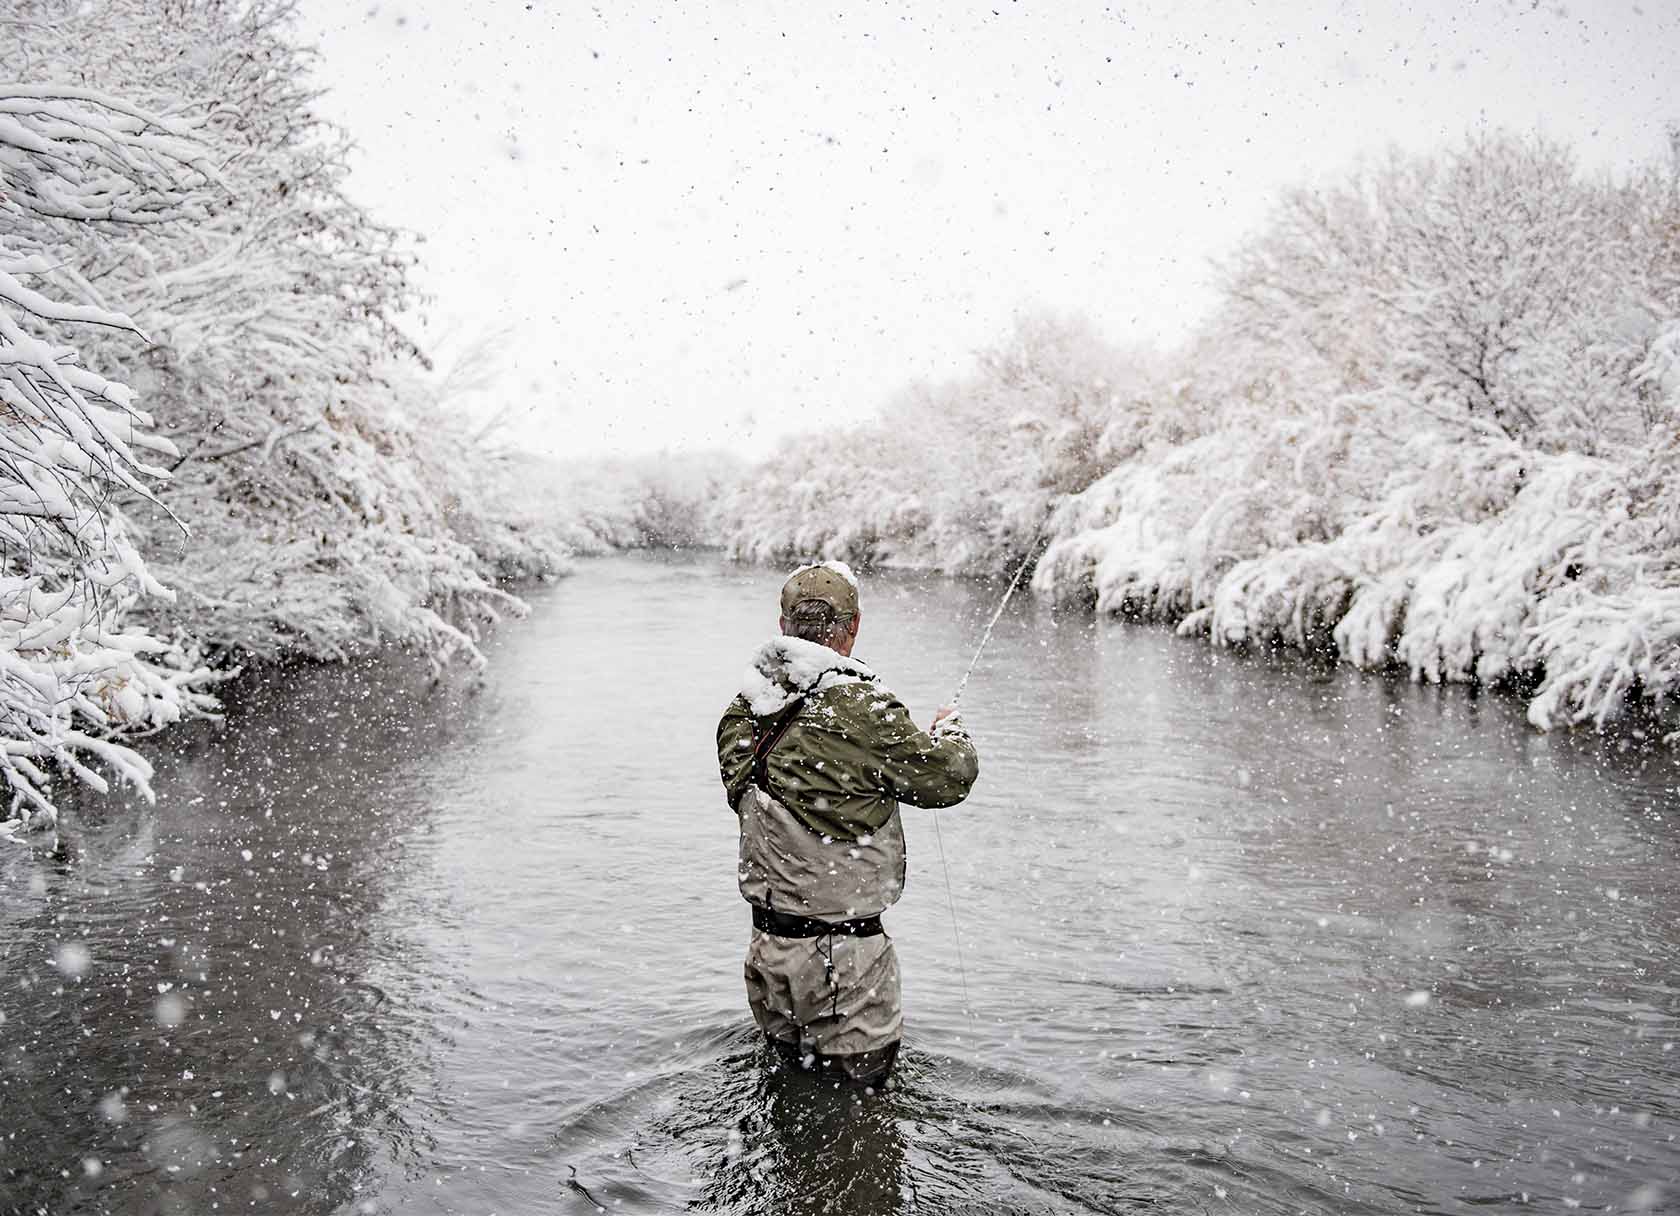 Last Minute Fly Fishing Gifts for Your Trout-Obsessed Loved Ones